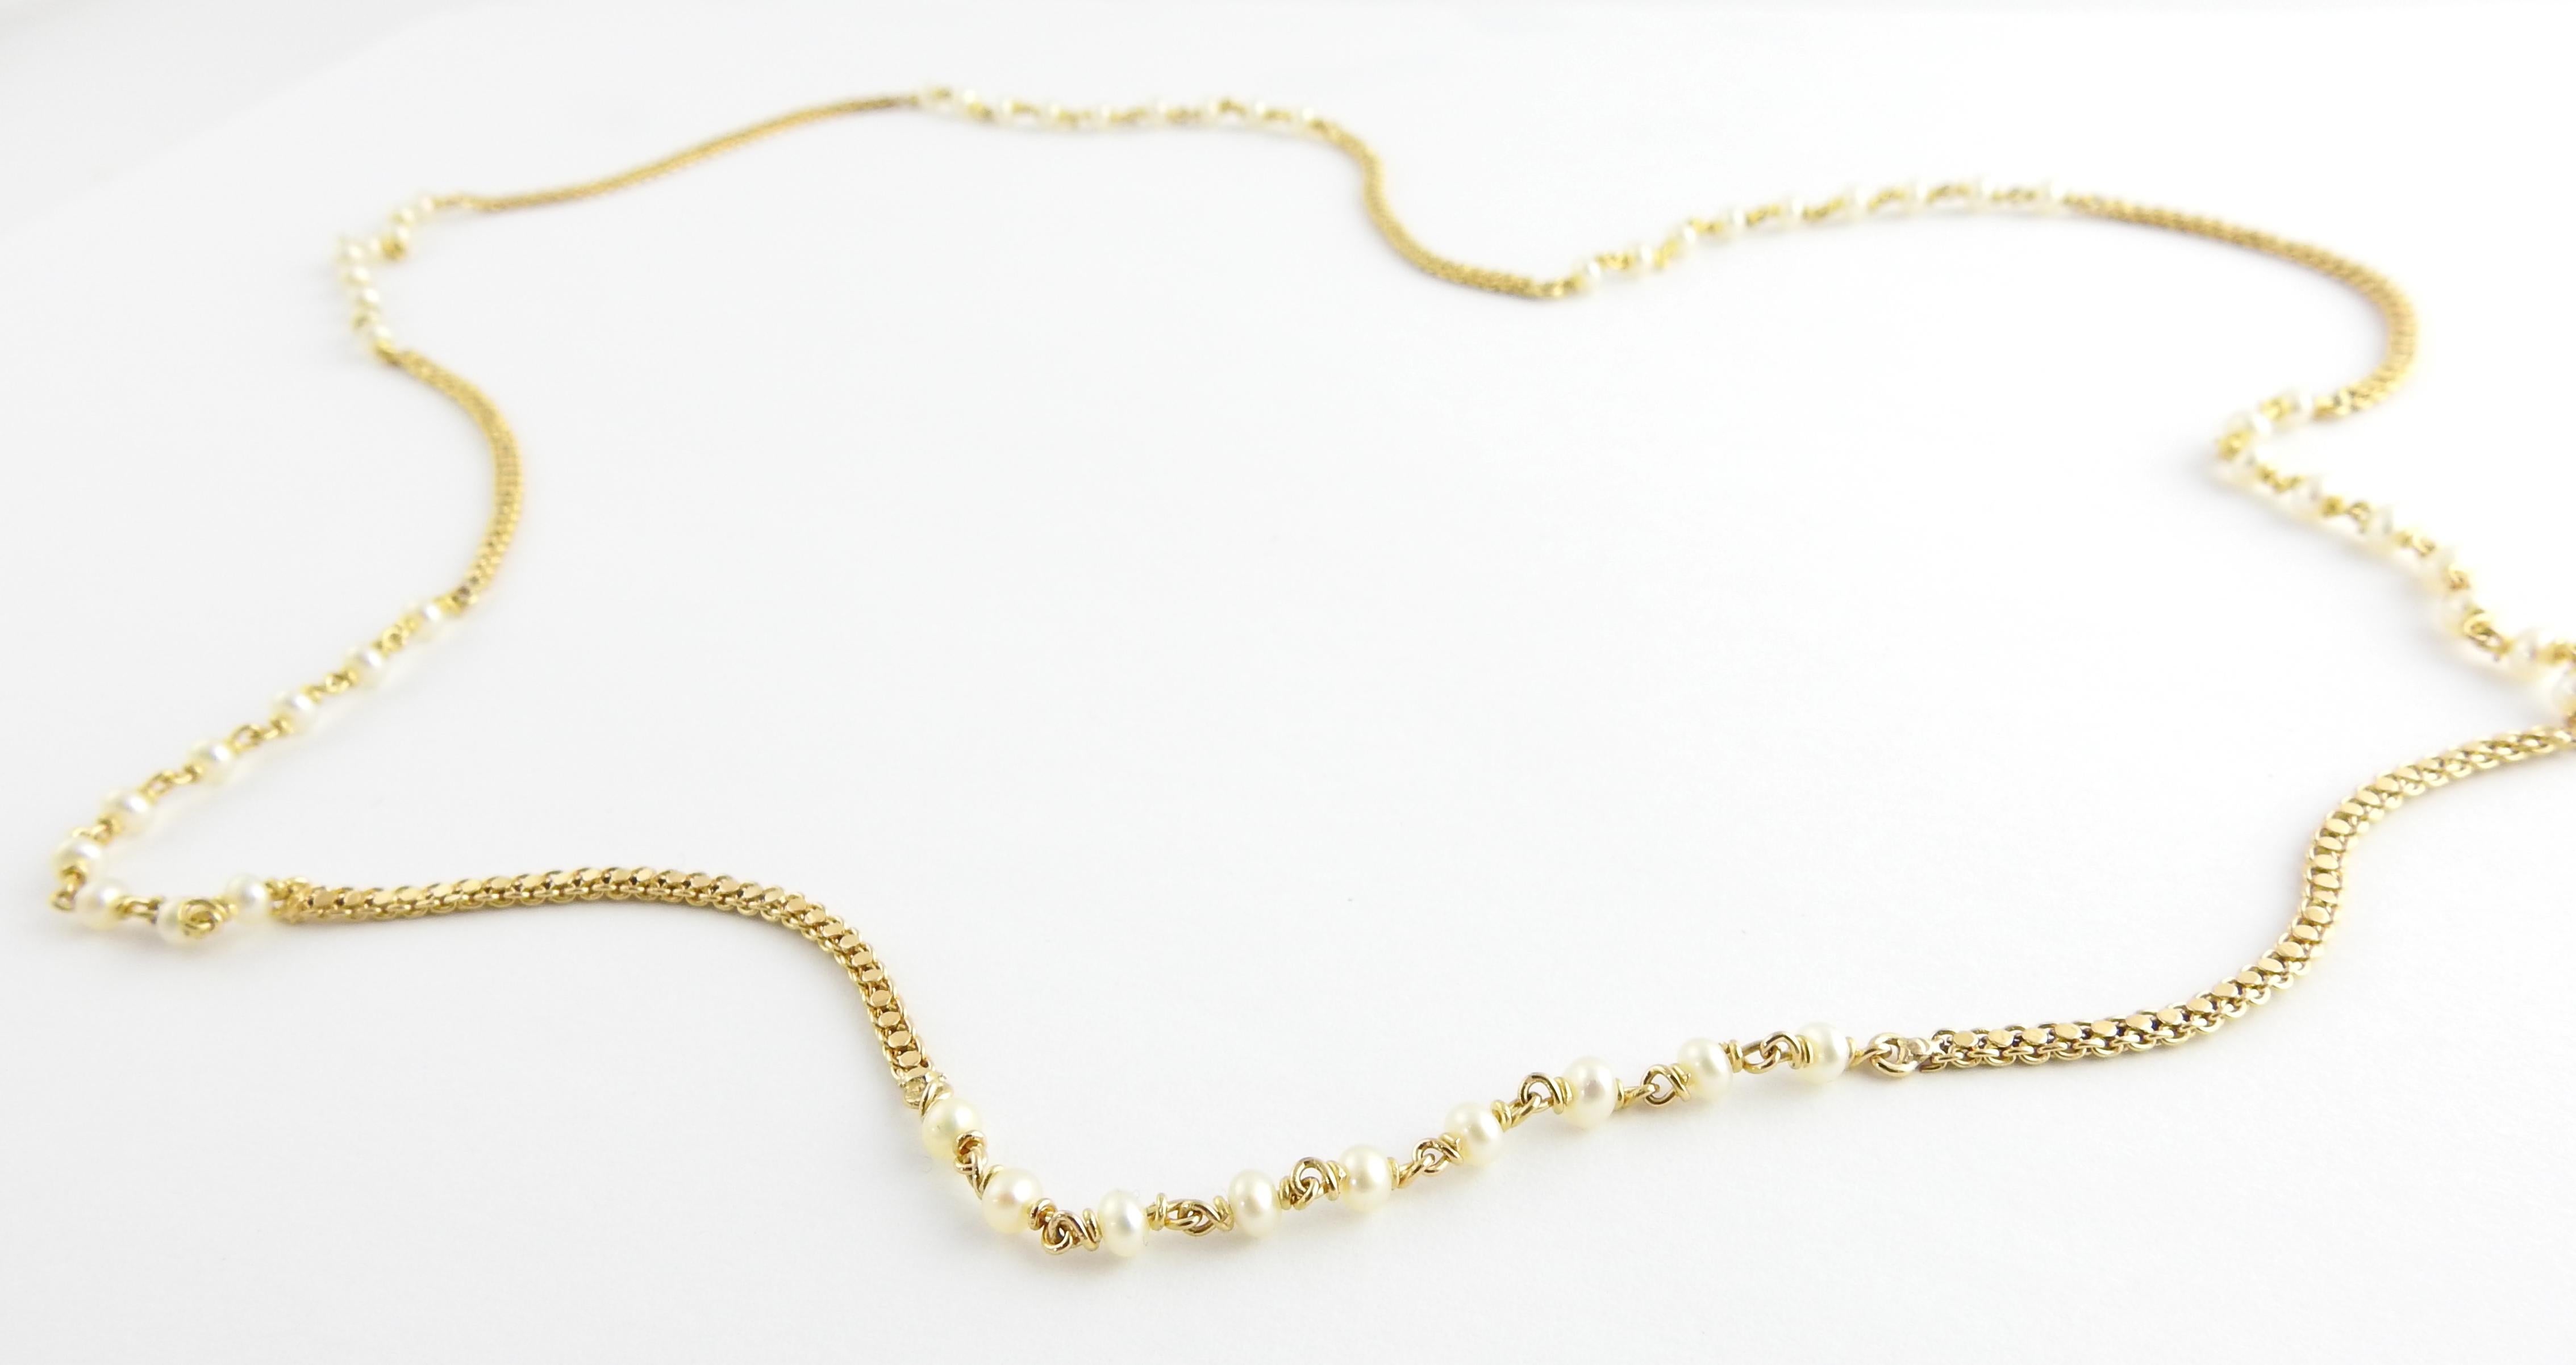 Vintage 18 Karat Yellow Gold and Pearl Necklace

This stunning necklace features 54 pearls  - 3 mm each - on an elegant 18K yellow gold chain.

Size: 18 inches

Weight: 8.0 dwt. / 12.5 gr.

Acid tested for 18K gold.

Very good condition,